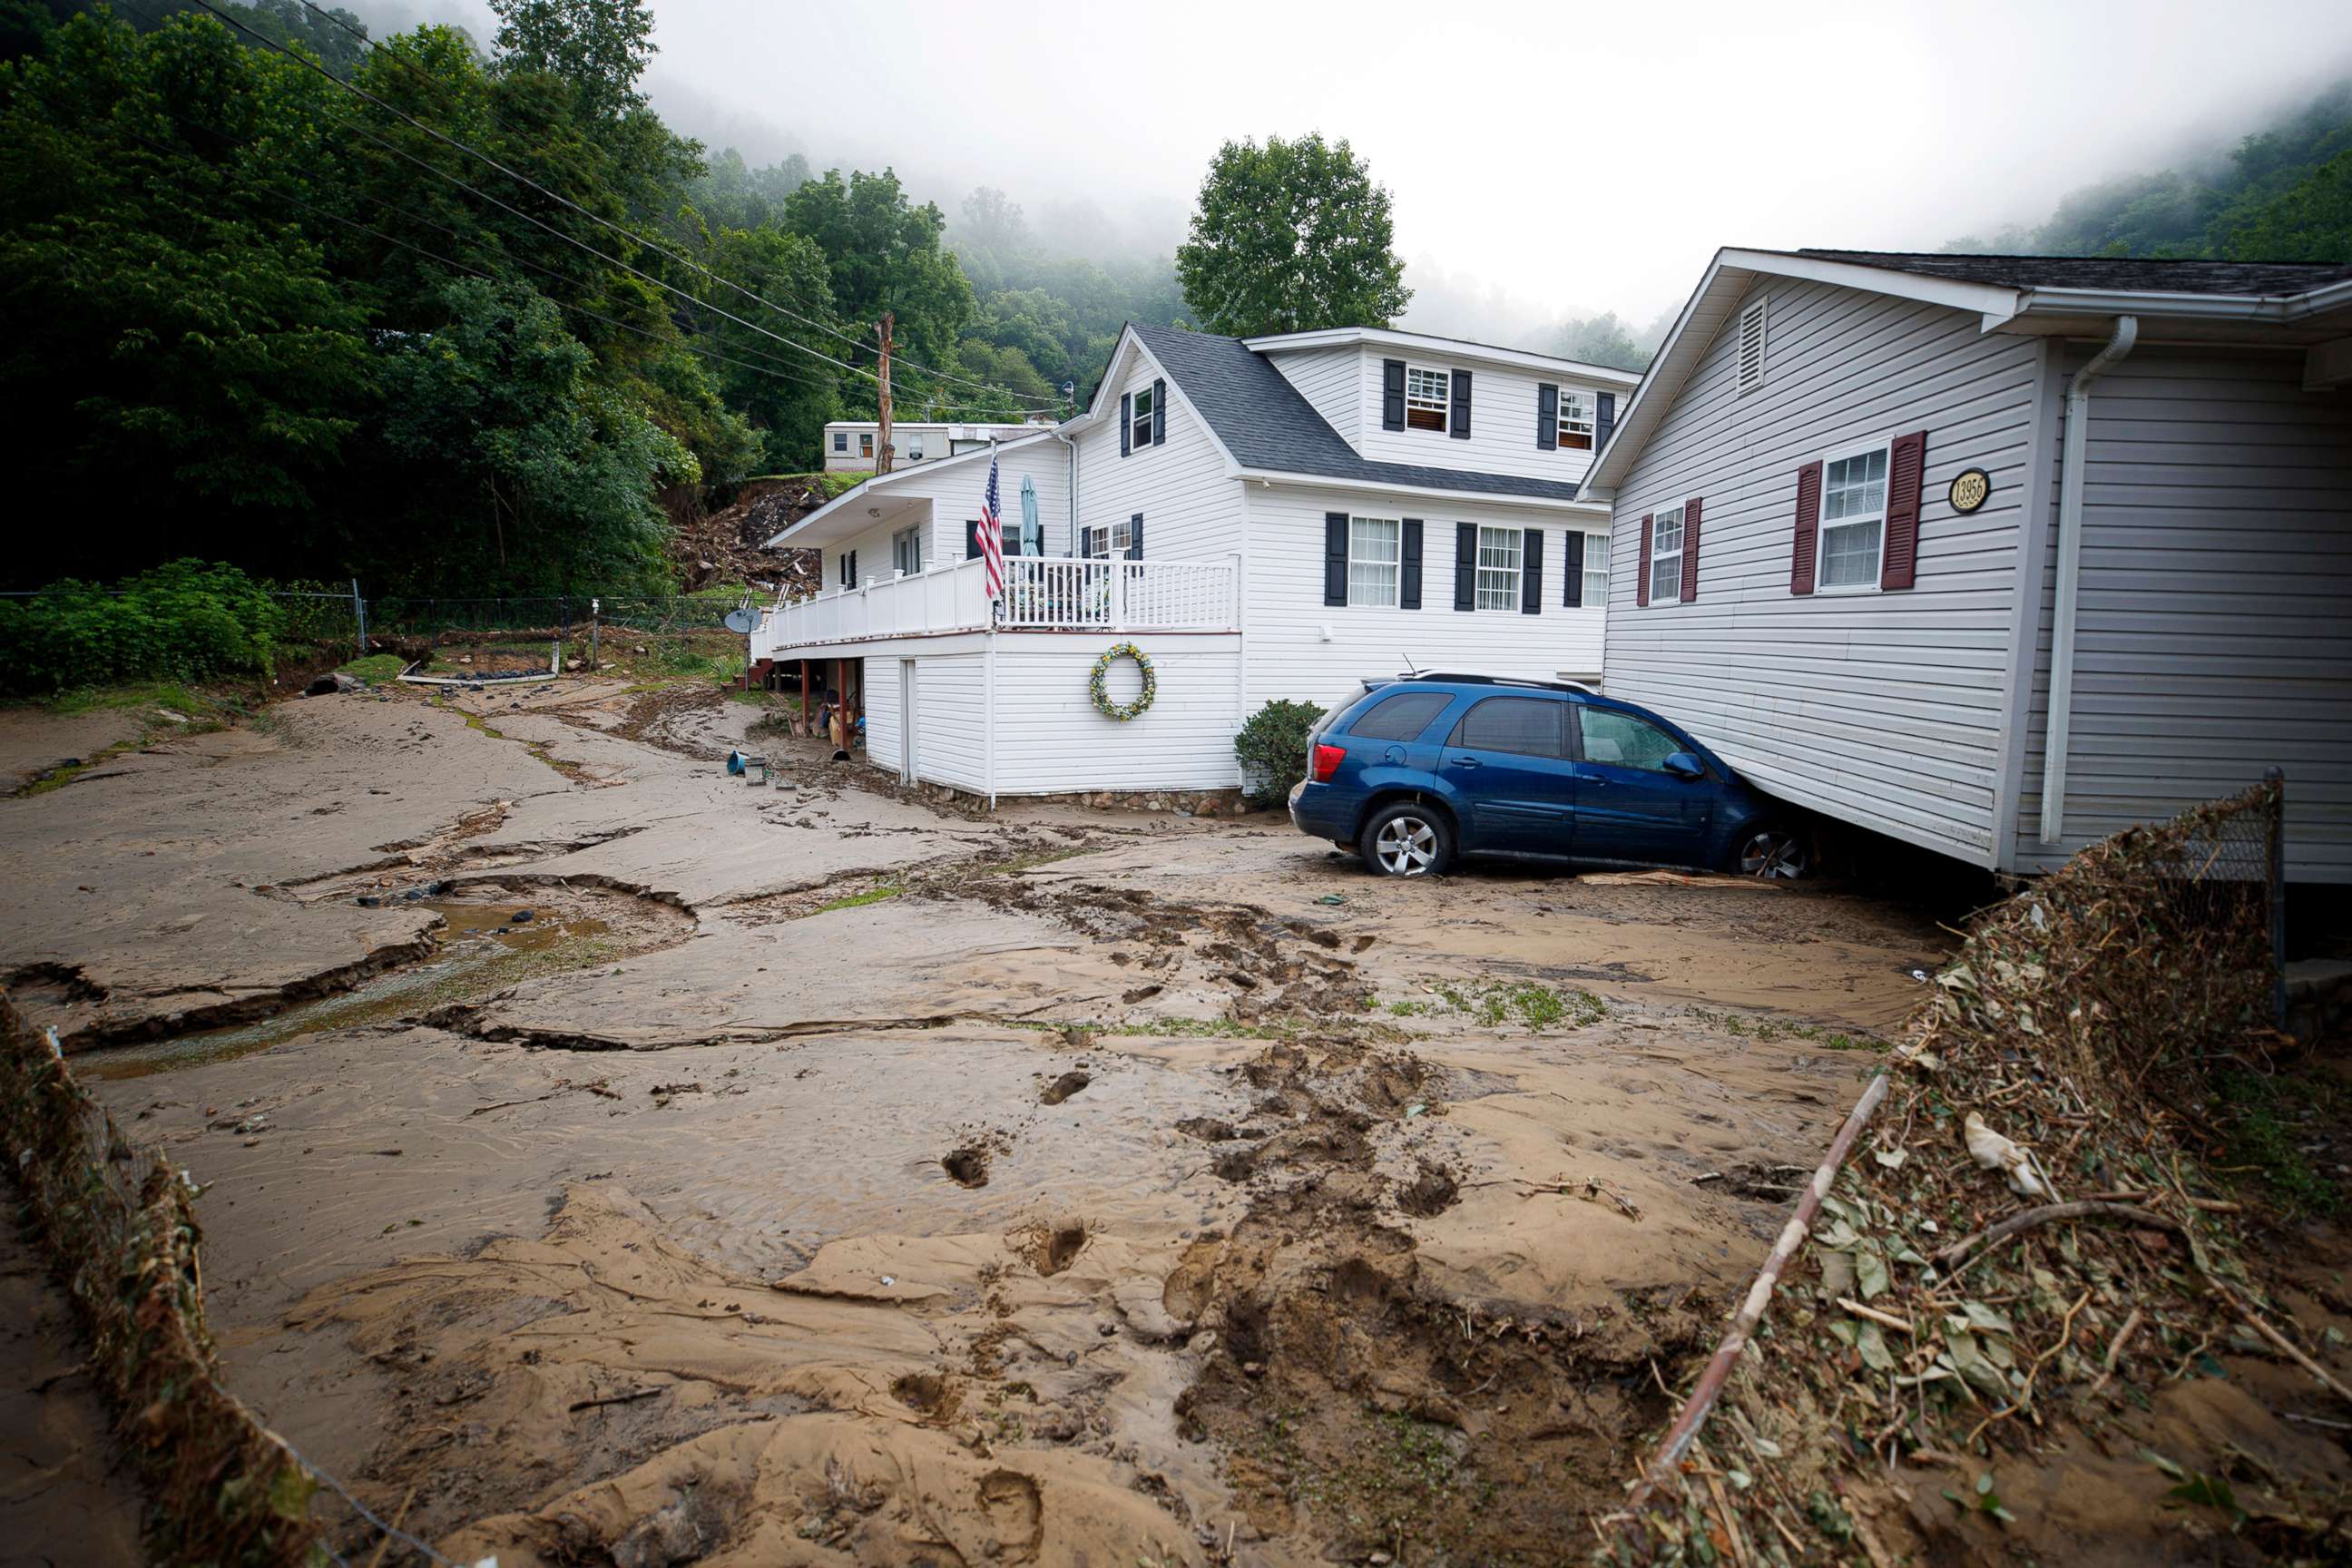 PHOTO: A house moved off of its foundation following a flash flood rests on top of a vehicle, July 14, 2022 in Whitewood, Va.